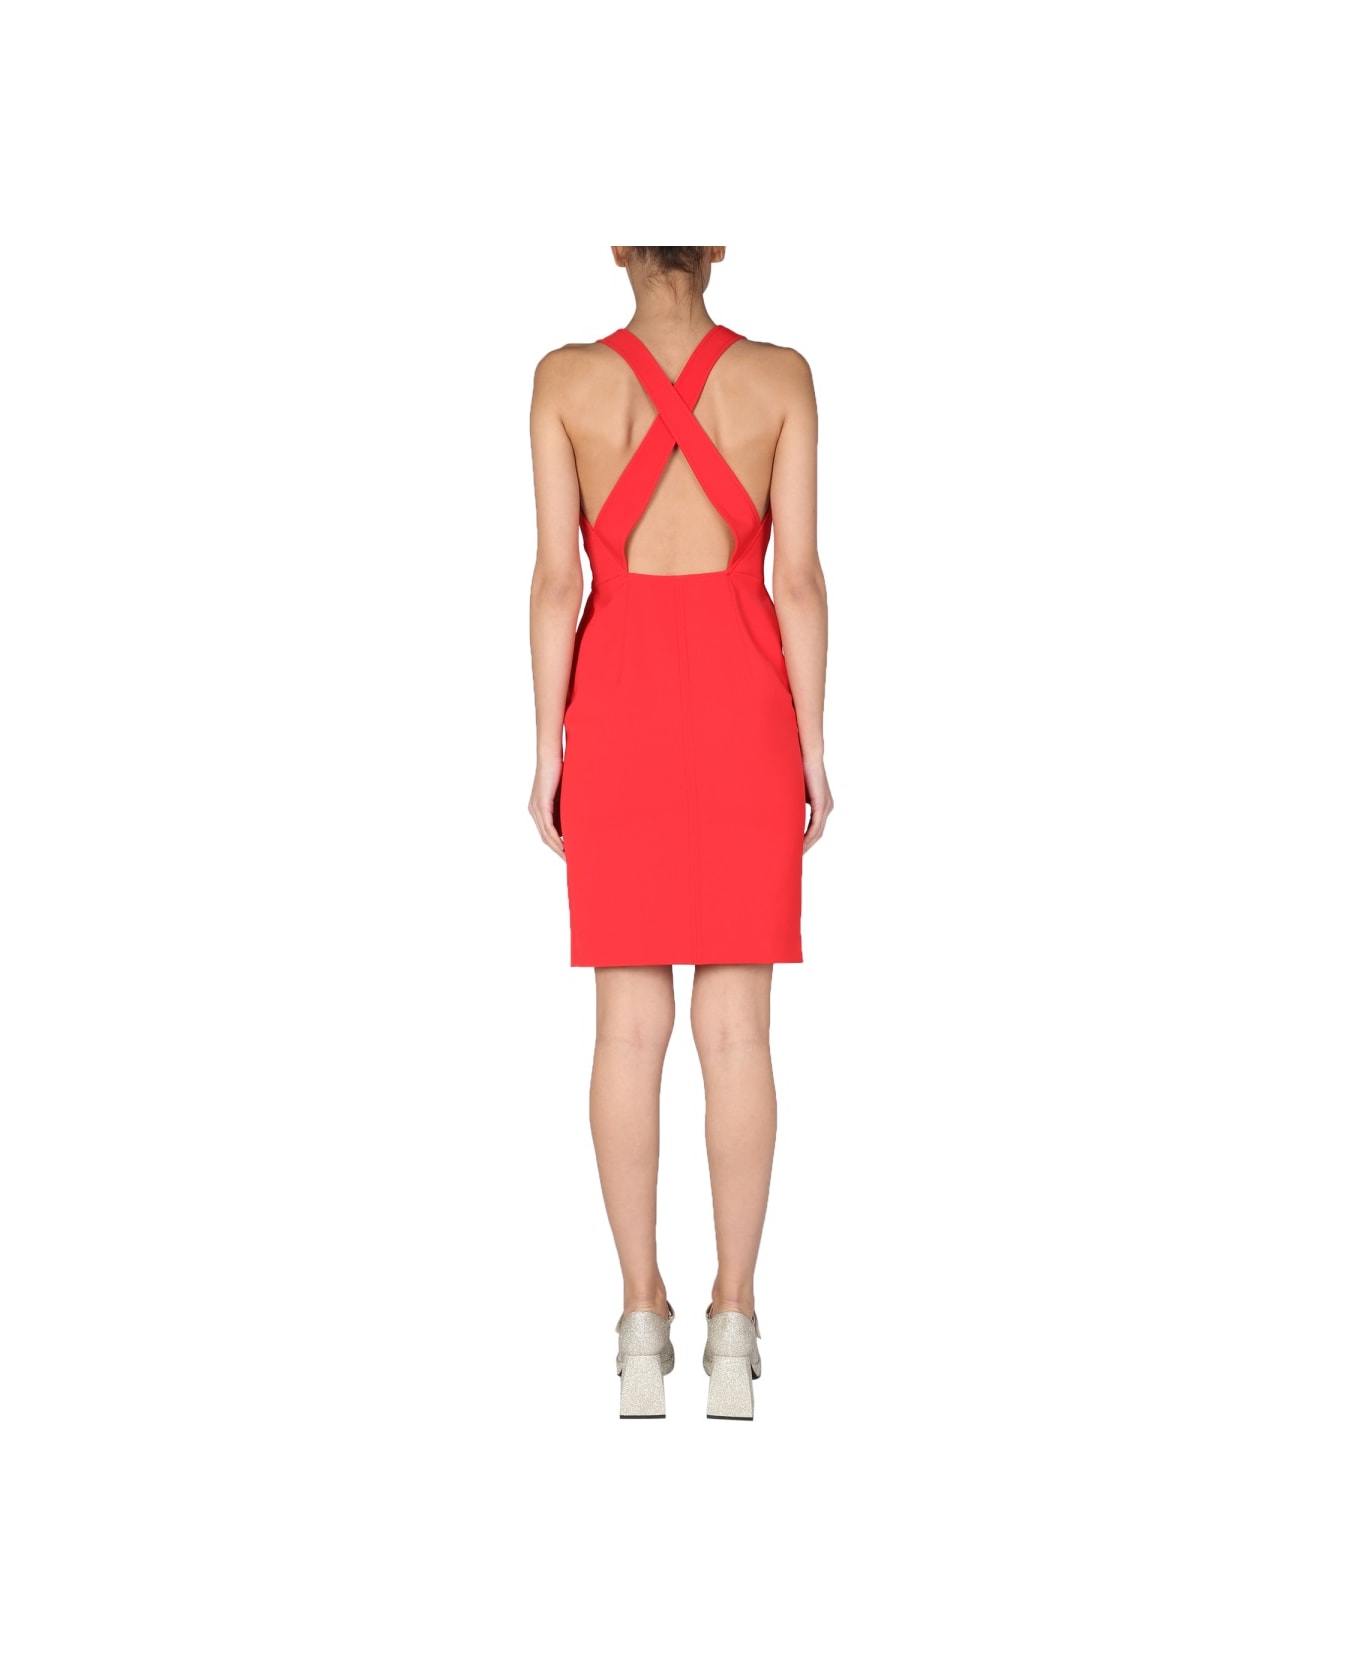 Boutique Moschino Dress With Cut Out Detail - RED